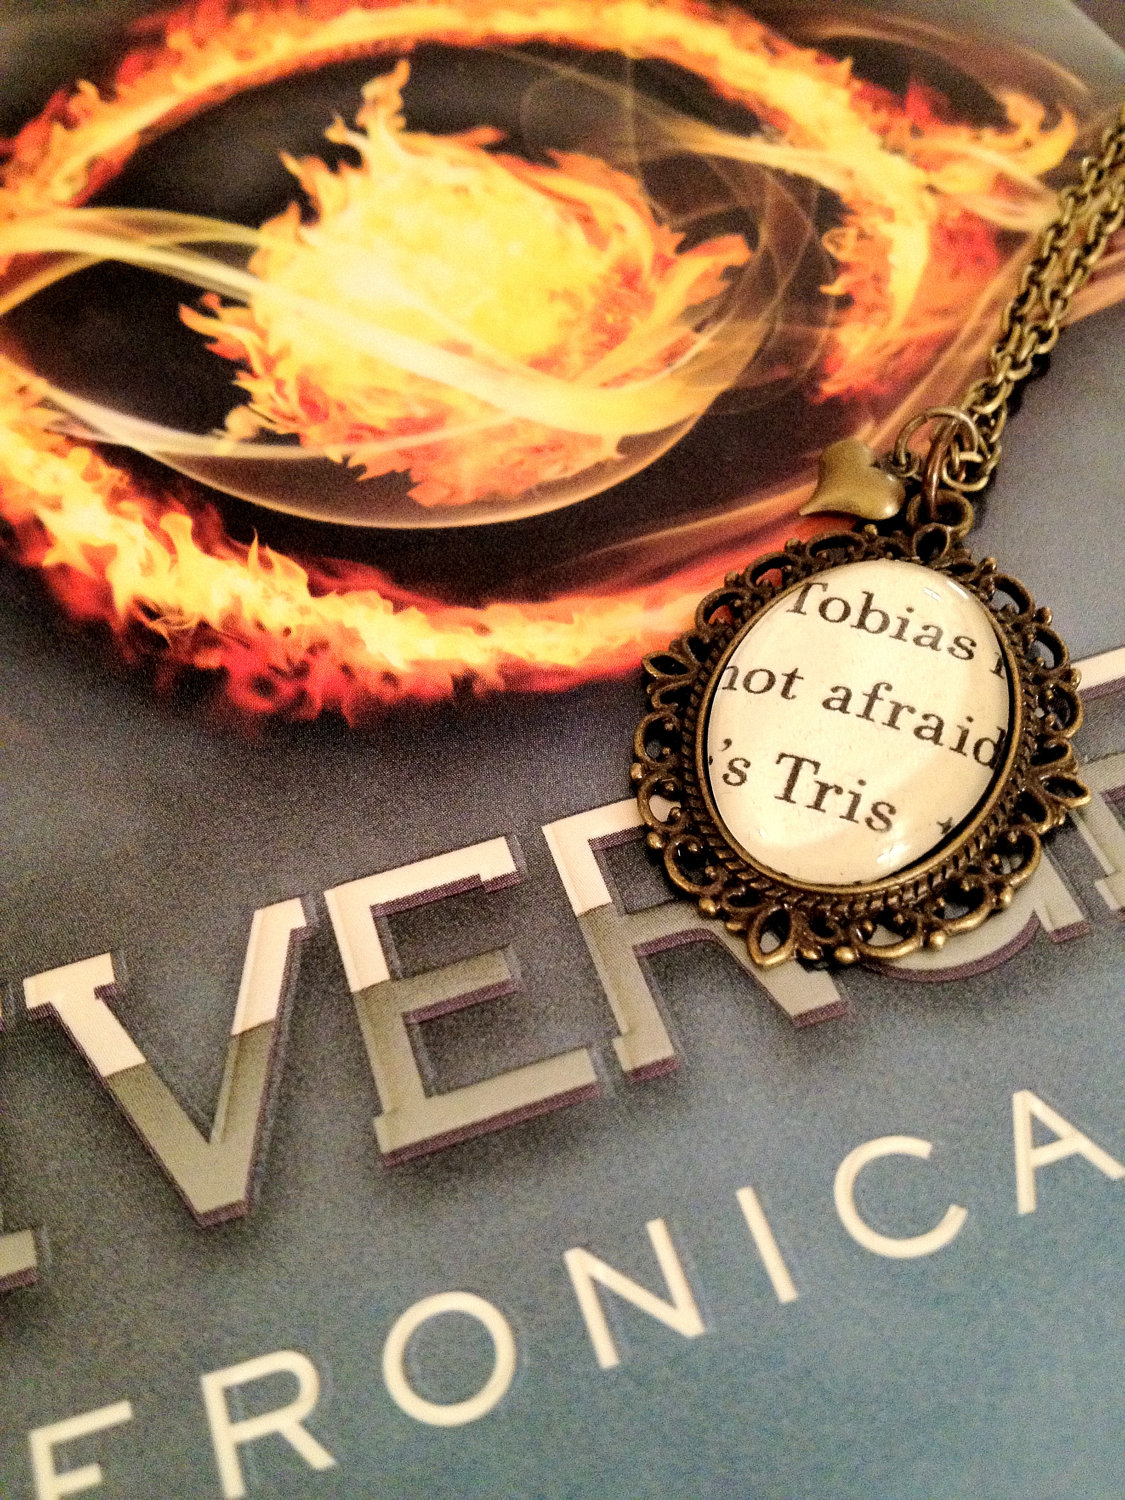 Tobias And Tris Veronica Roth Divergent Antiqued Bronze Book Page Necklace